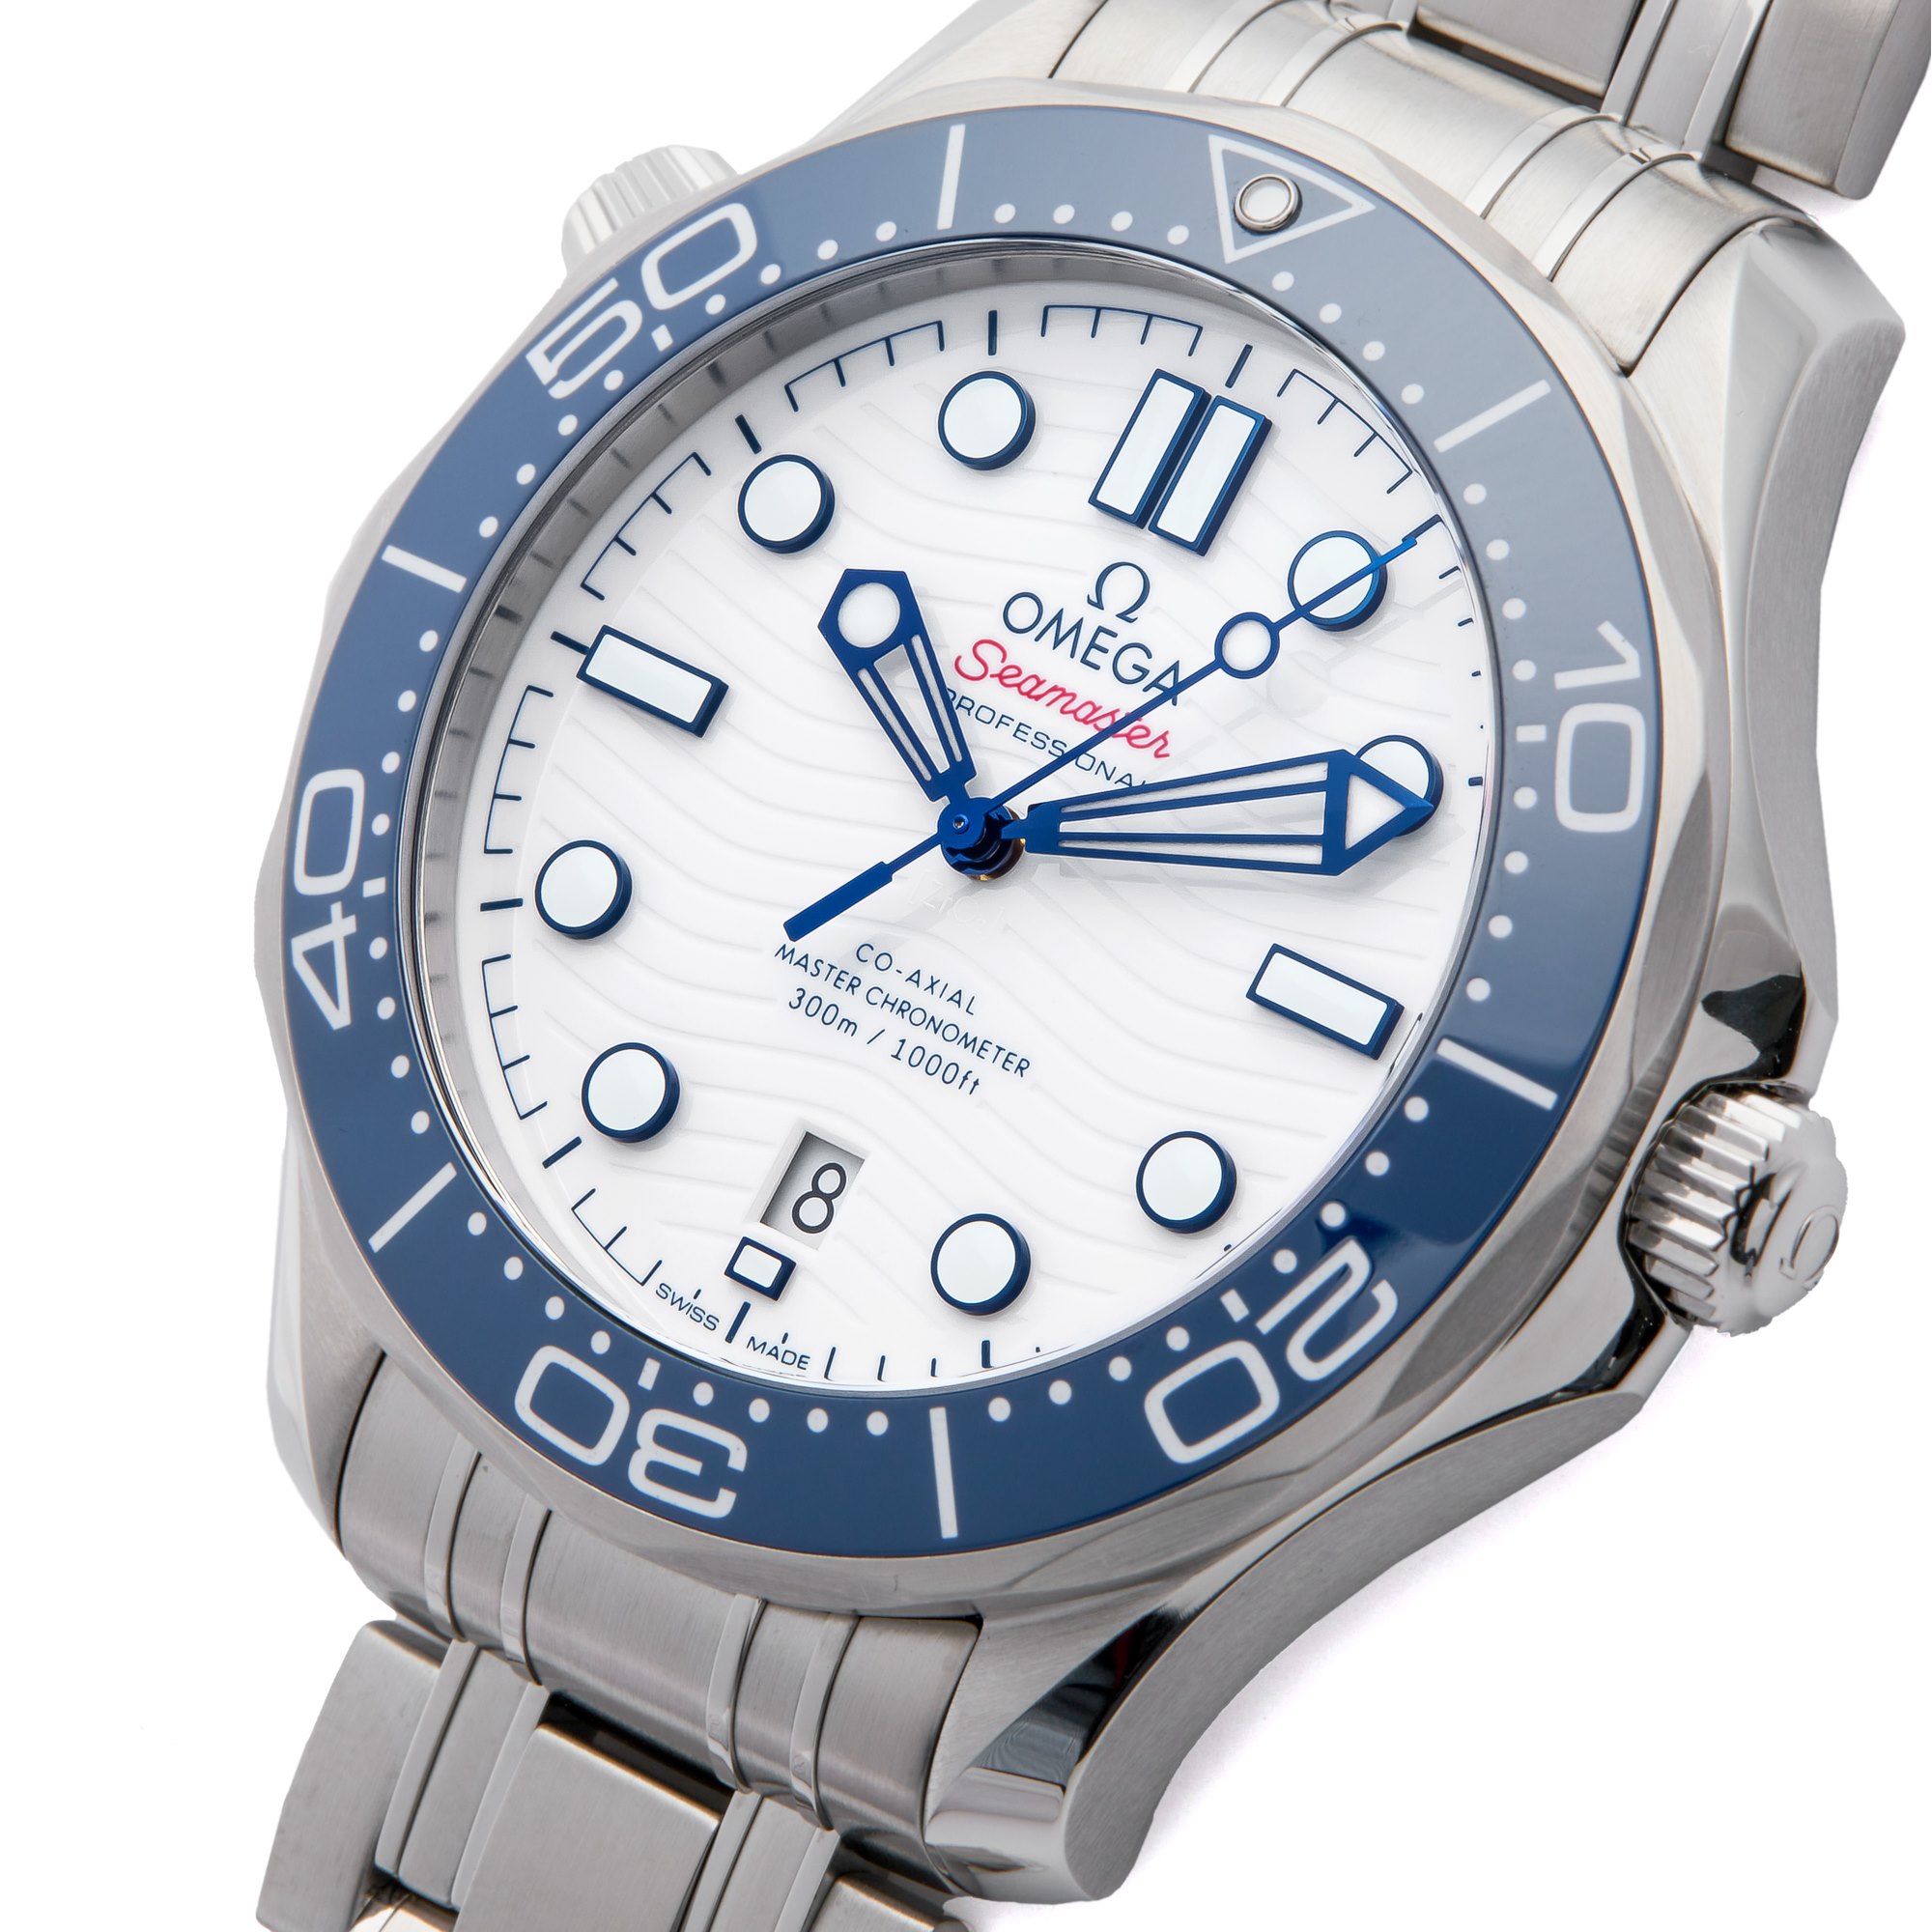 Omega Seamaster Tokyo Olympics 2020 Roestvrij Staal 522.30.42.20.04.001